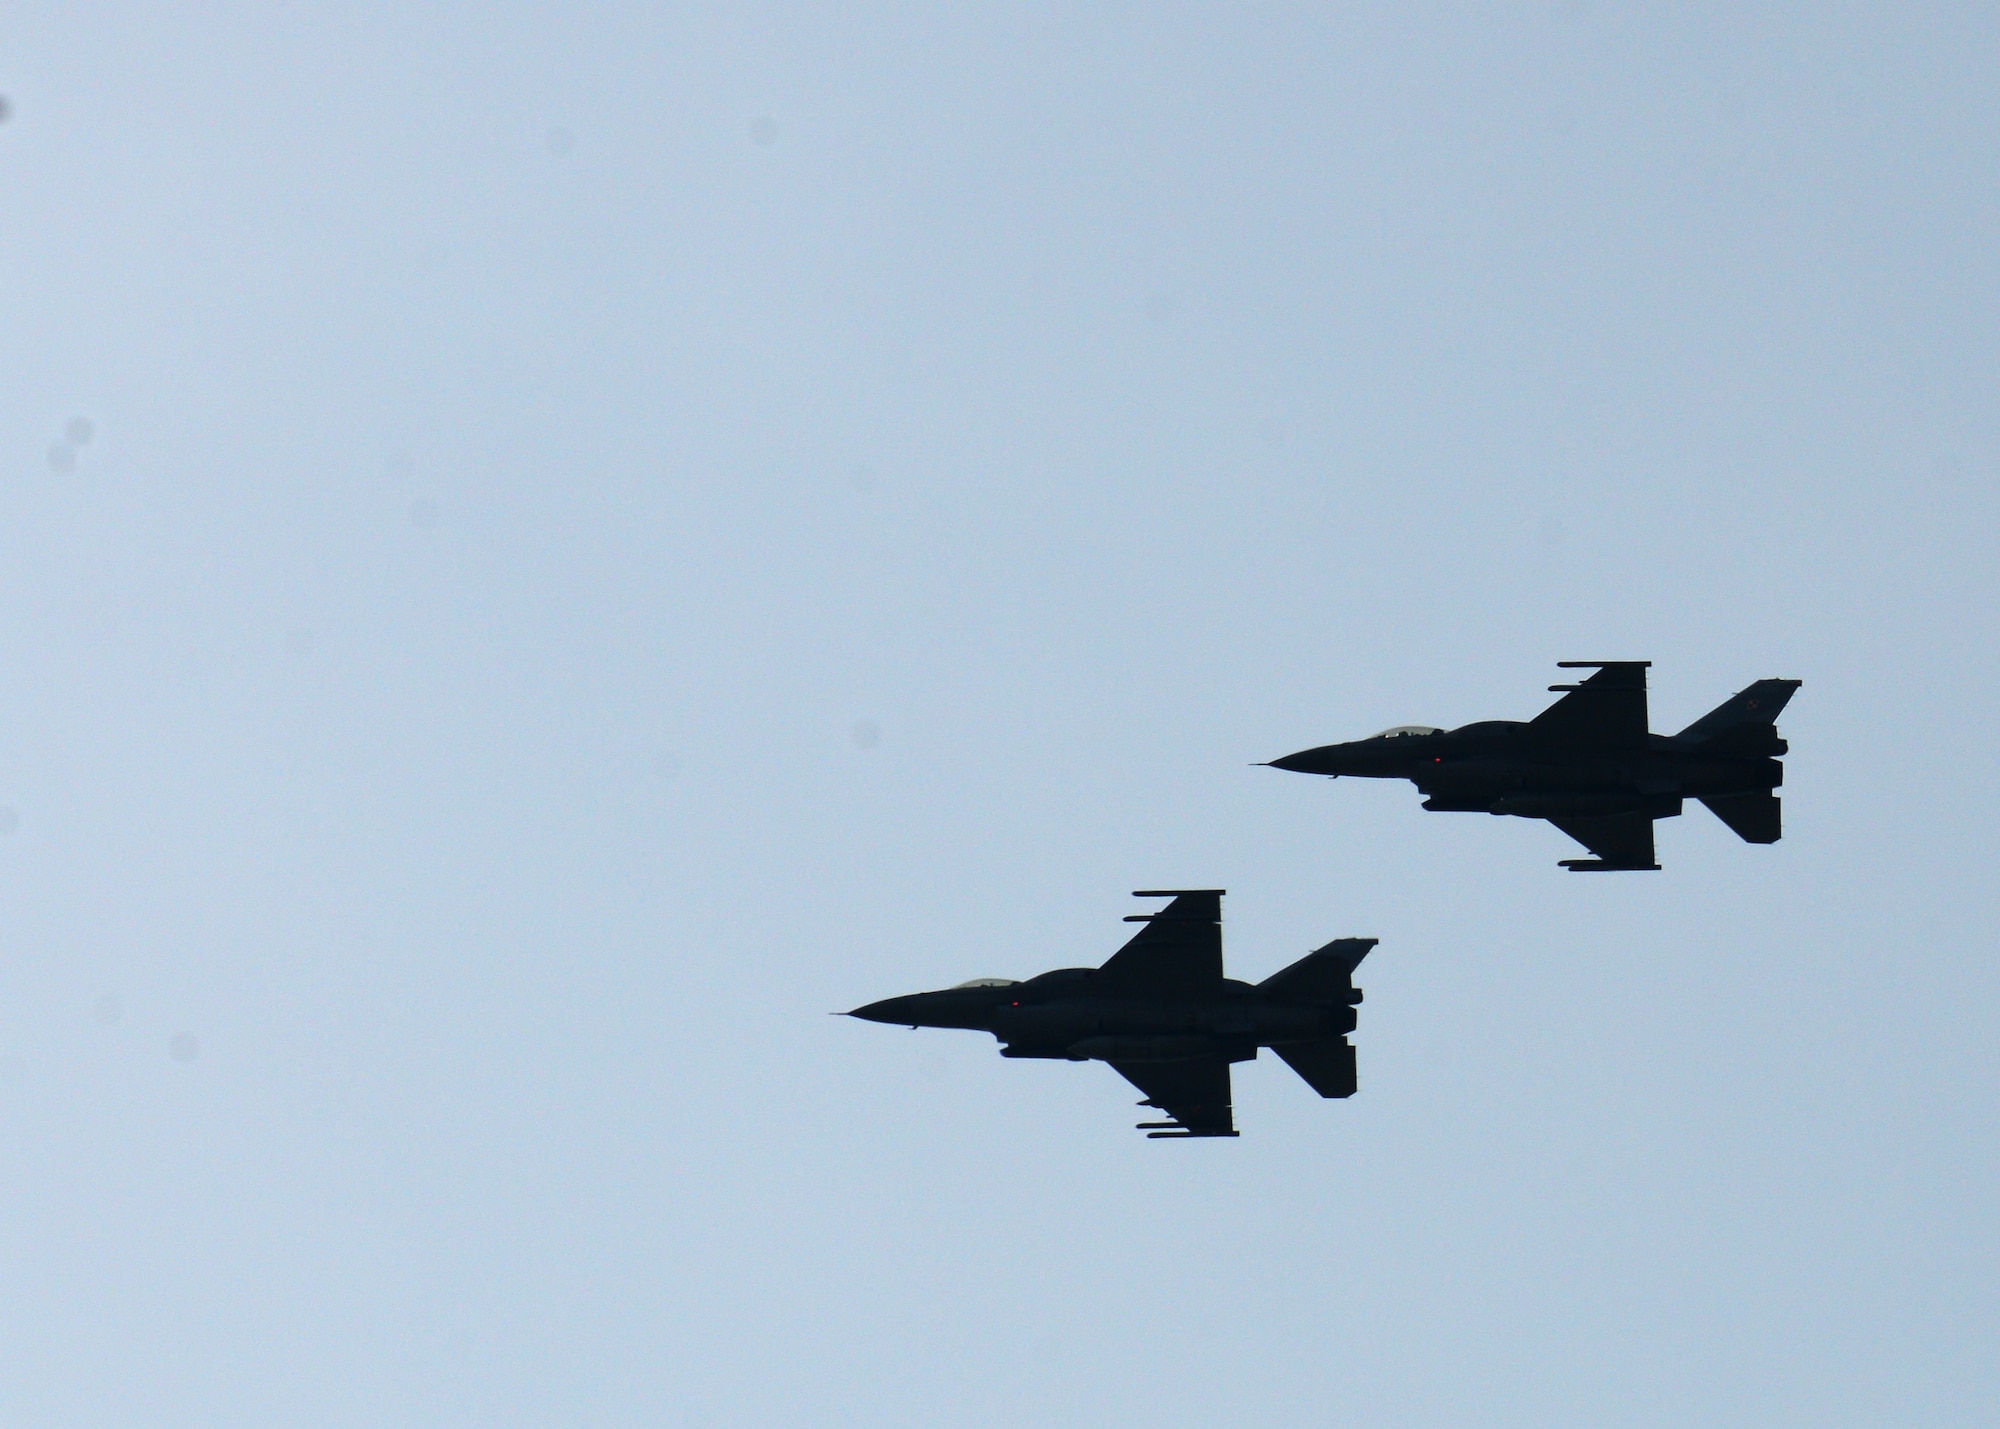 Two Polish air force F-16 Fighting Falcon fighter aircraft fly in formation during a training mission, April 1, 2014, over Łask Air Base, Poland. Poland continues to build its relationship with the U.S. as both nations' air forces train in a joint theater capacity for the first time since the arrival of 31st Fighter Wing aircraft and personnel from Aviano Air Base, Italy. (U.S. Air Force photo/Airman 1st Class Ryan Conroy/Released)